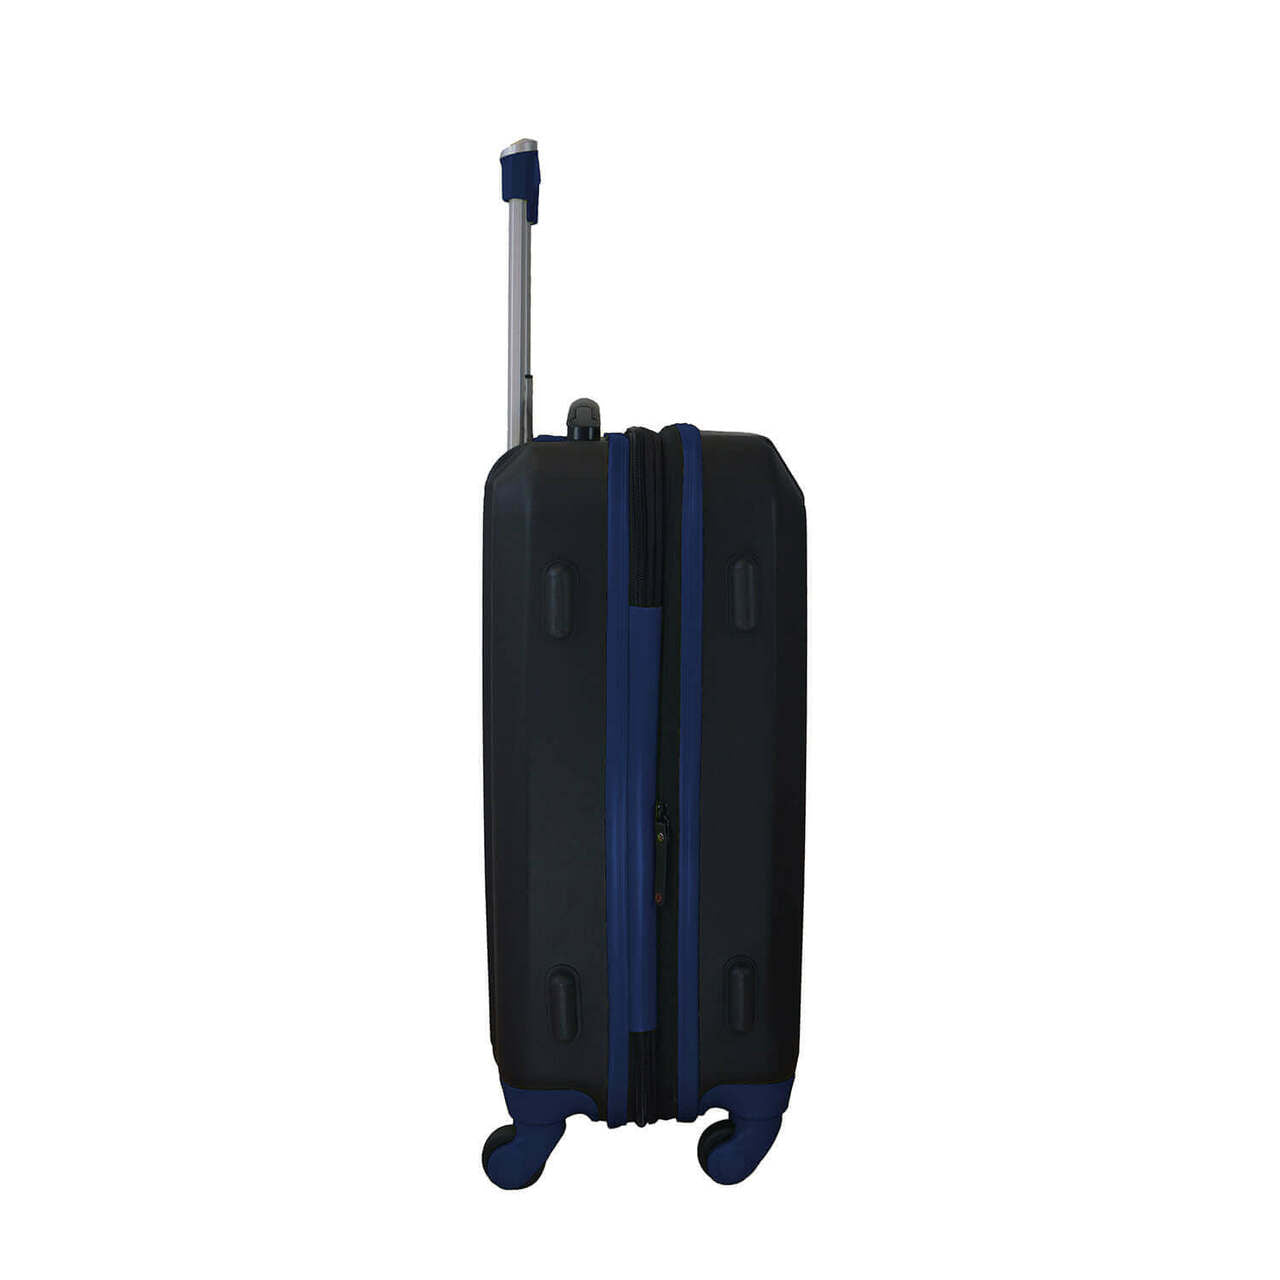 US Airforce Carry On Spinner Luggage | US Airforce Academy Hardcase Two-Tone Luggage Carry-on Spinner in Navy